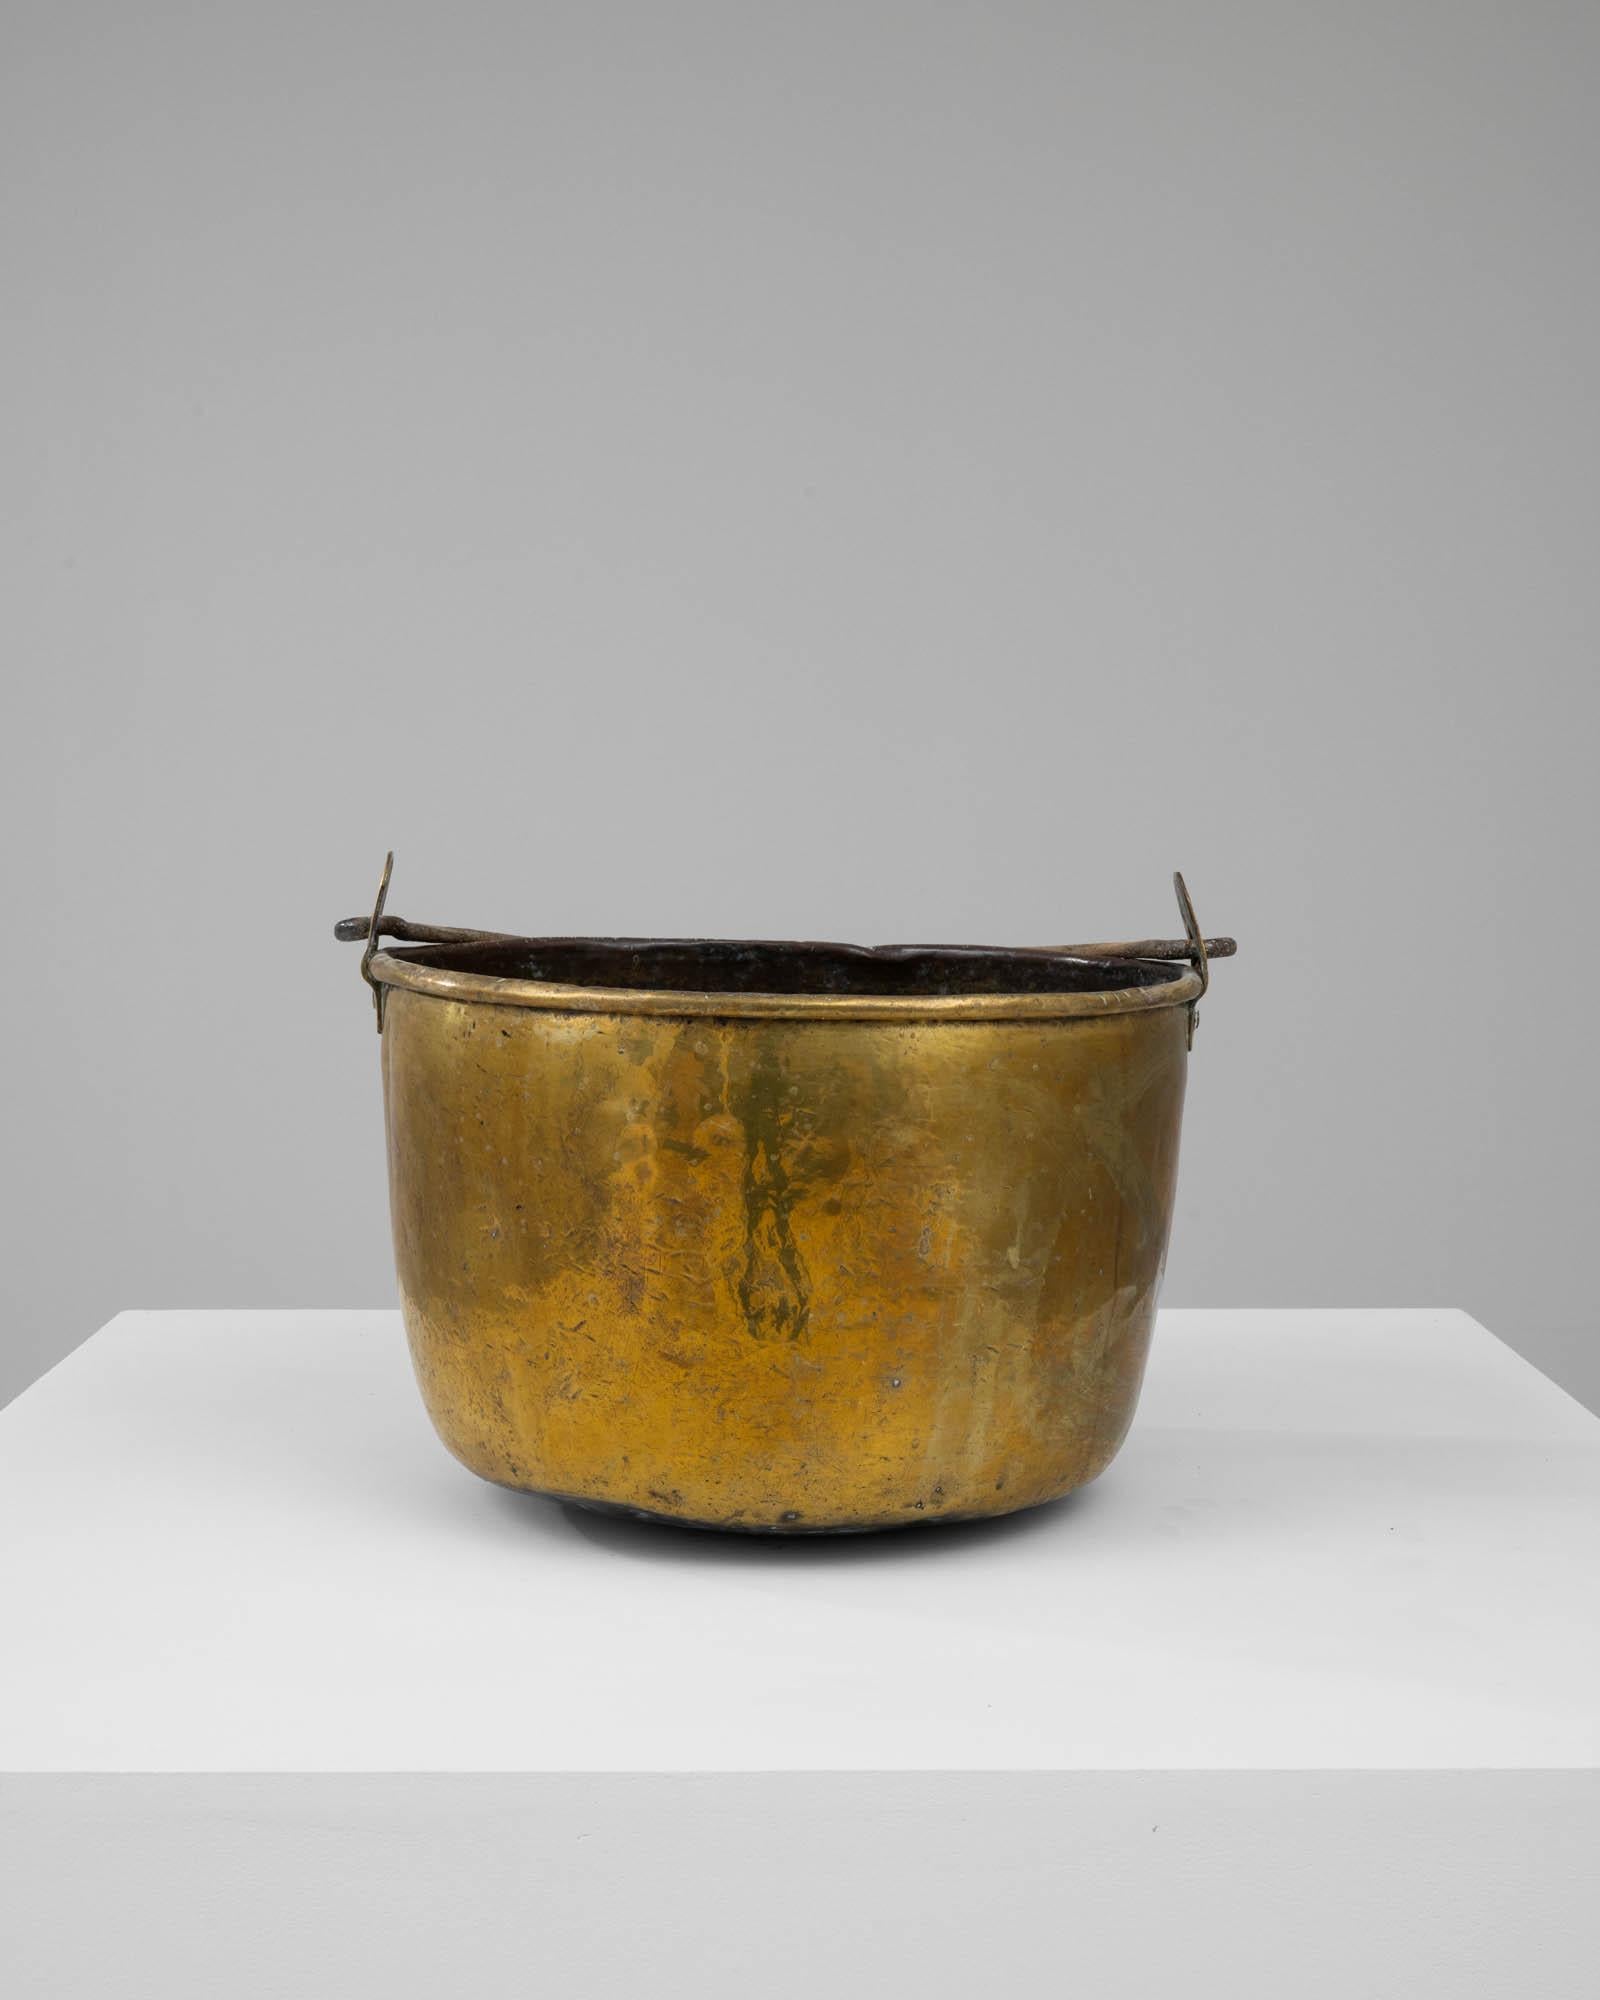 This Early 19th Century French Brass Bucket is an enchanting piece of functional history, evoking the everyday life and labors of the past. Constructed from brass, this bucket has acquired a warm golden patina over the years, bearing marks and